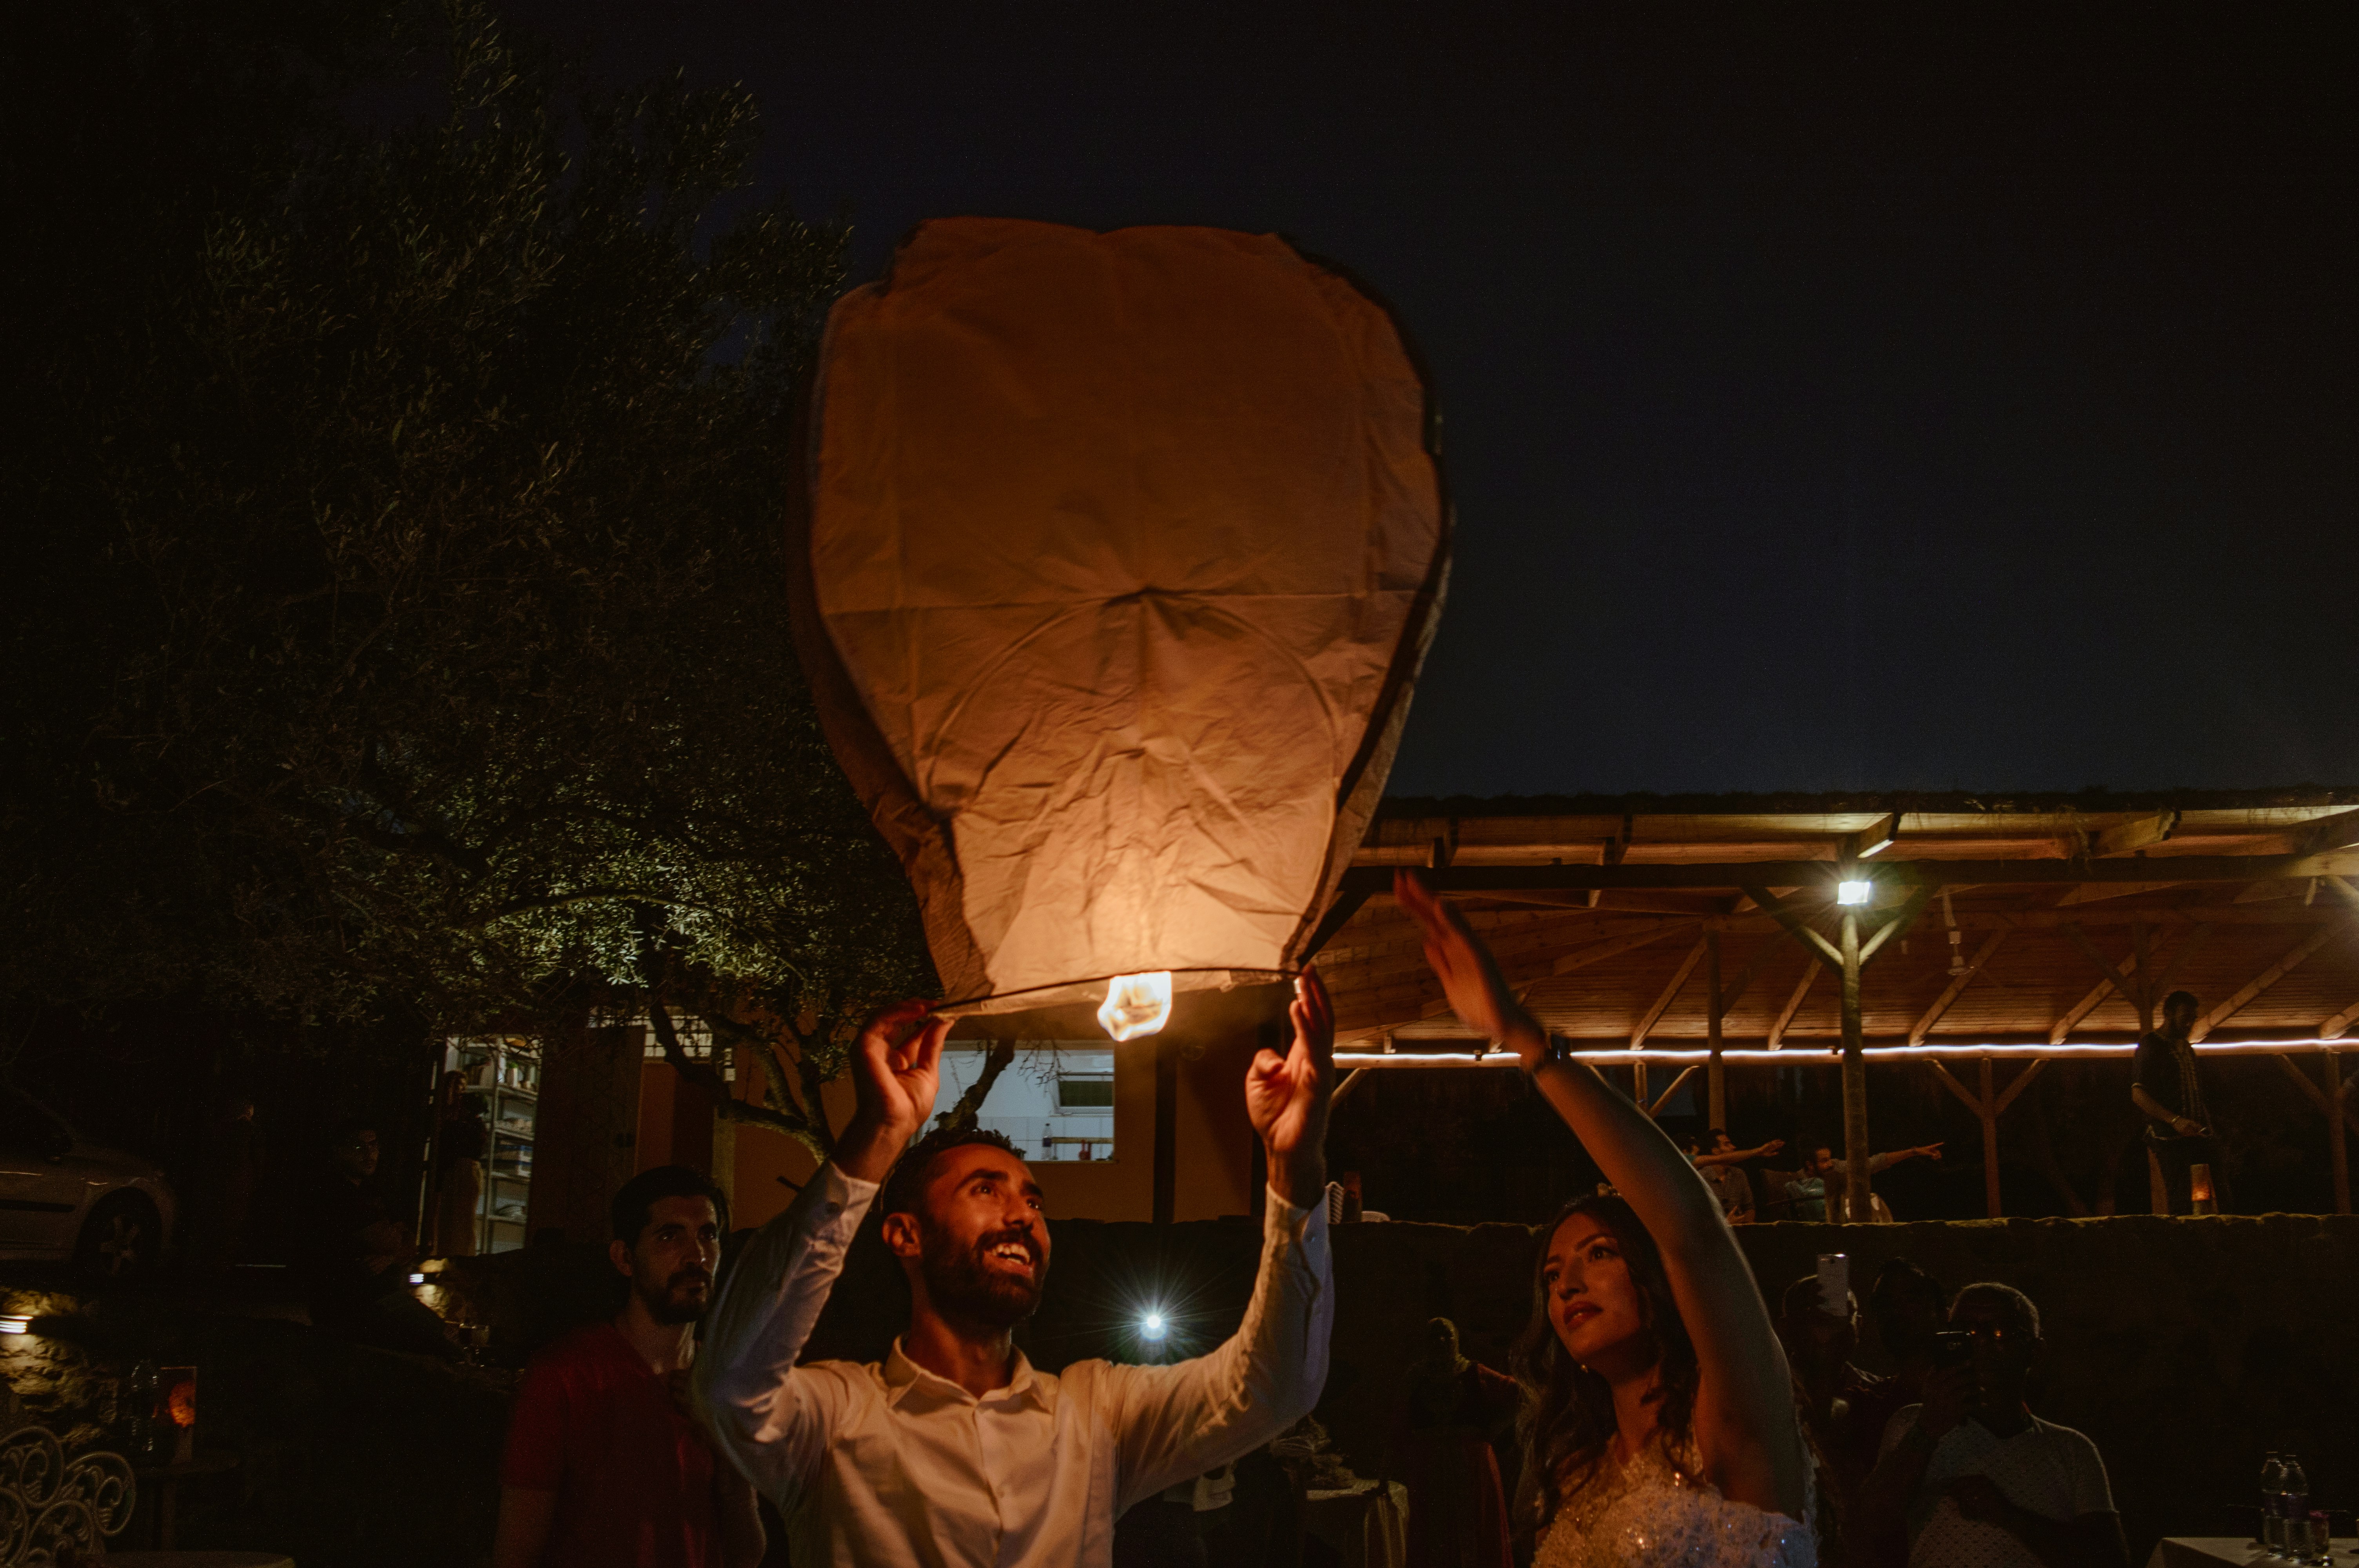 man in brown jacket holding brown heart shaped balloon during nighttime